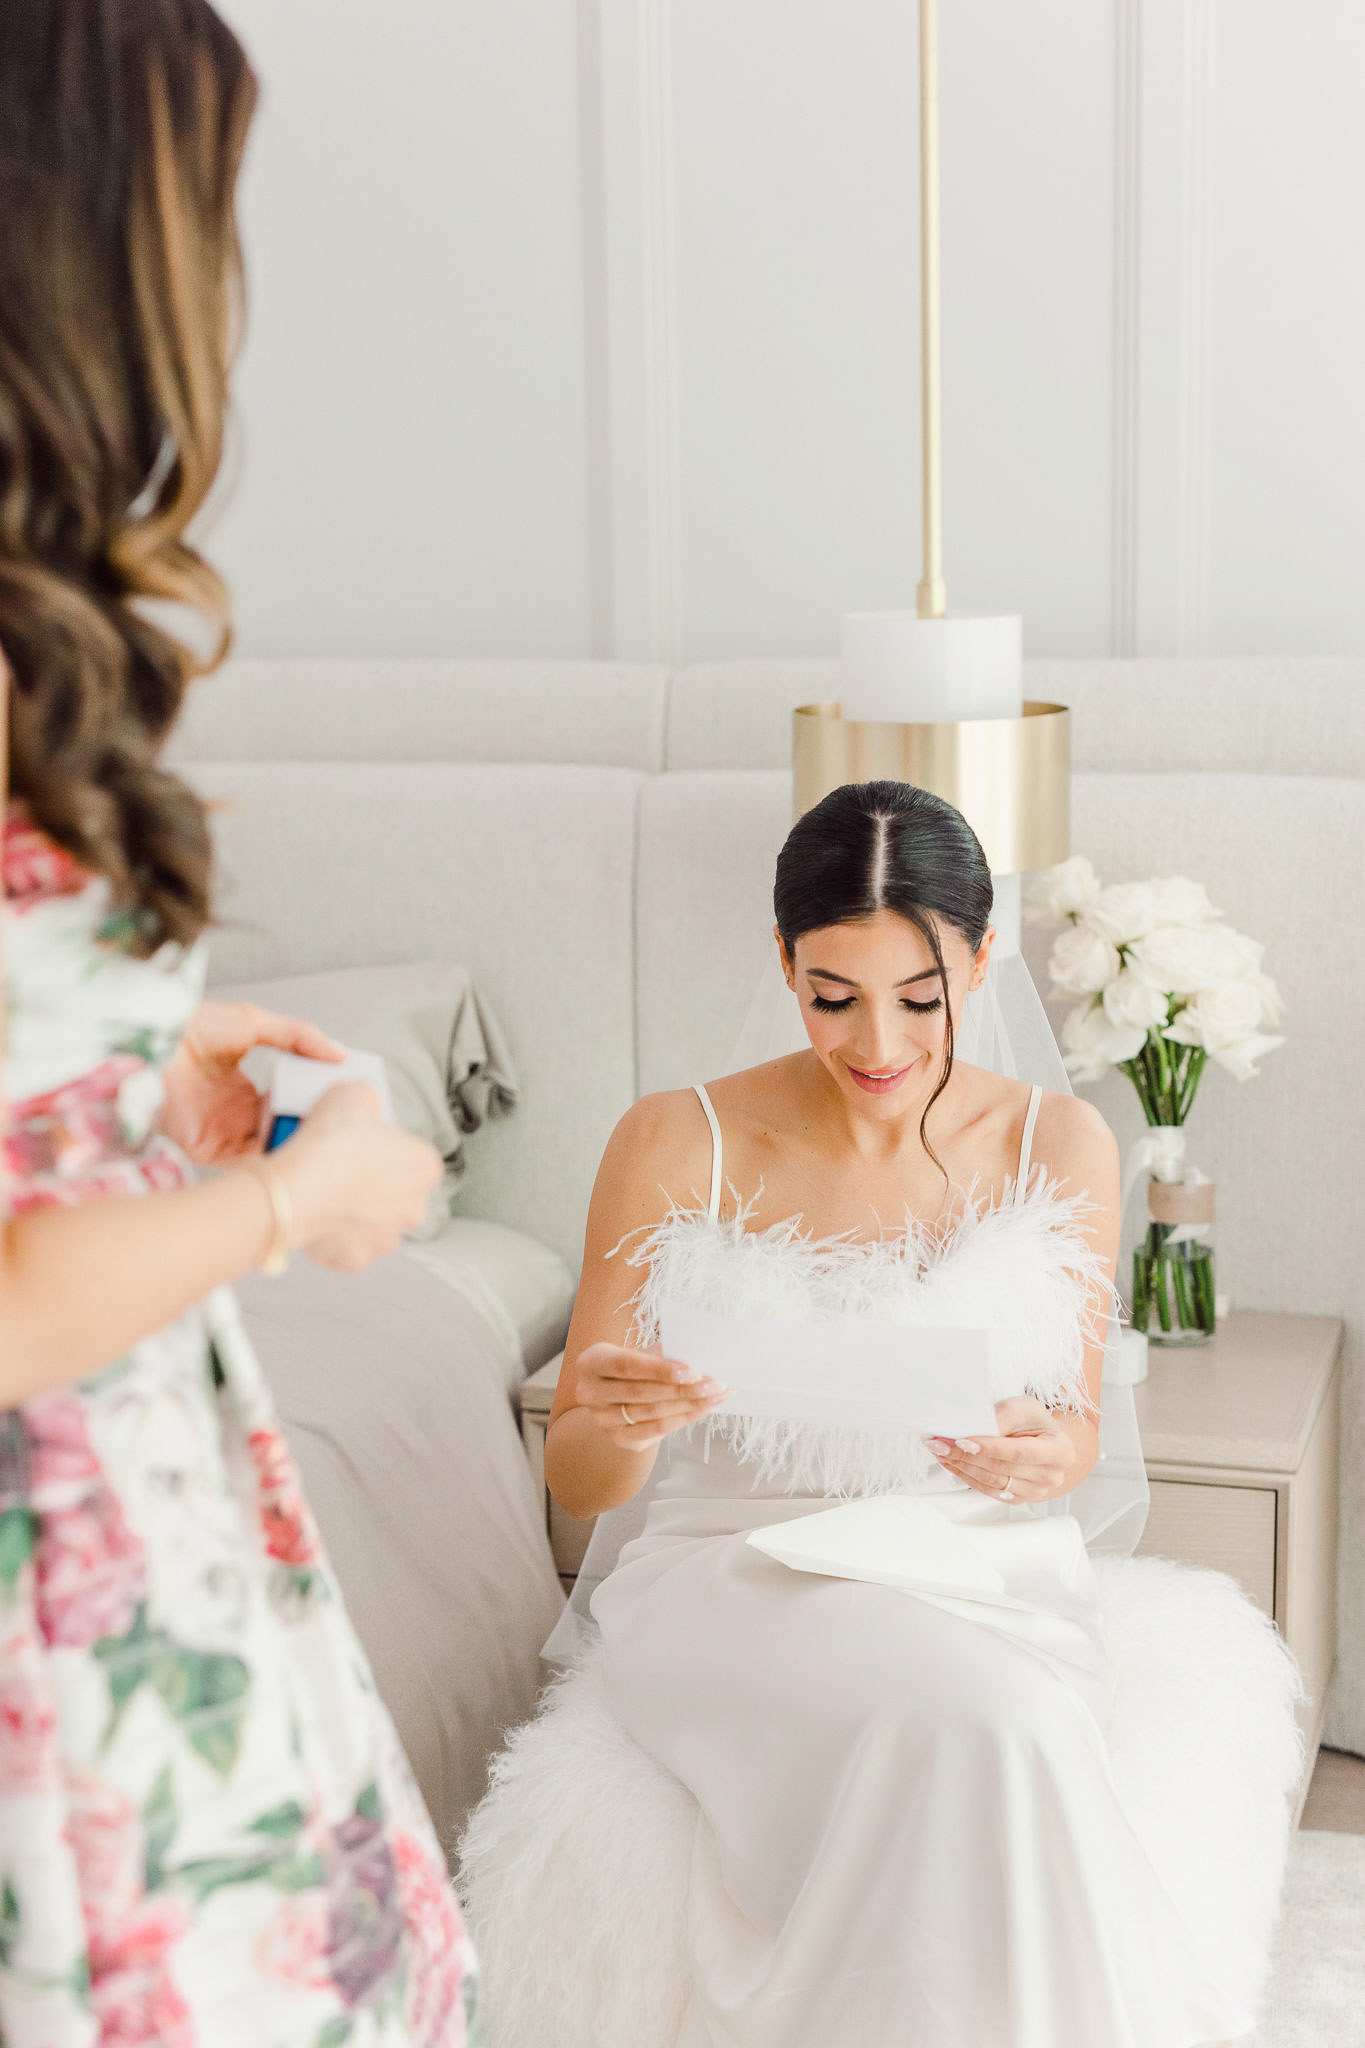 Two brides getting ready in a white bedroom.